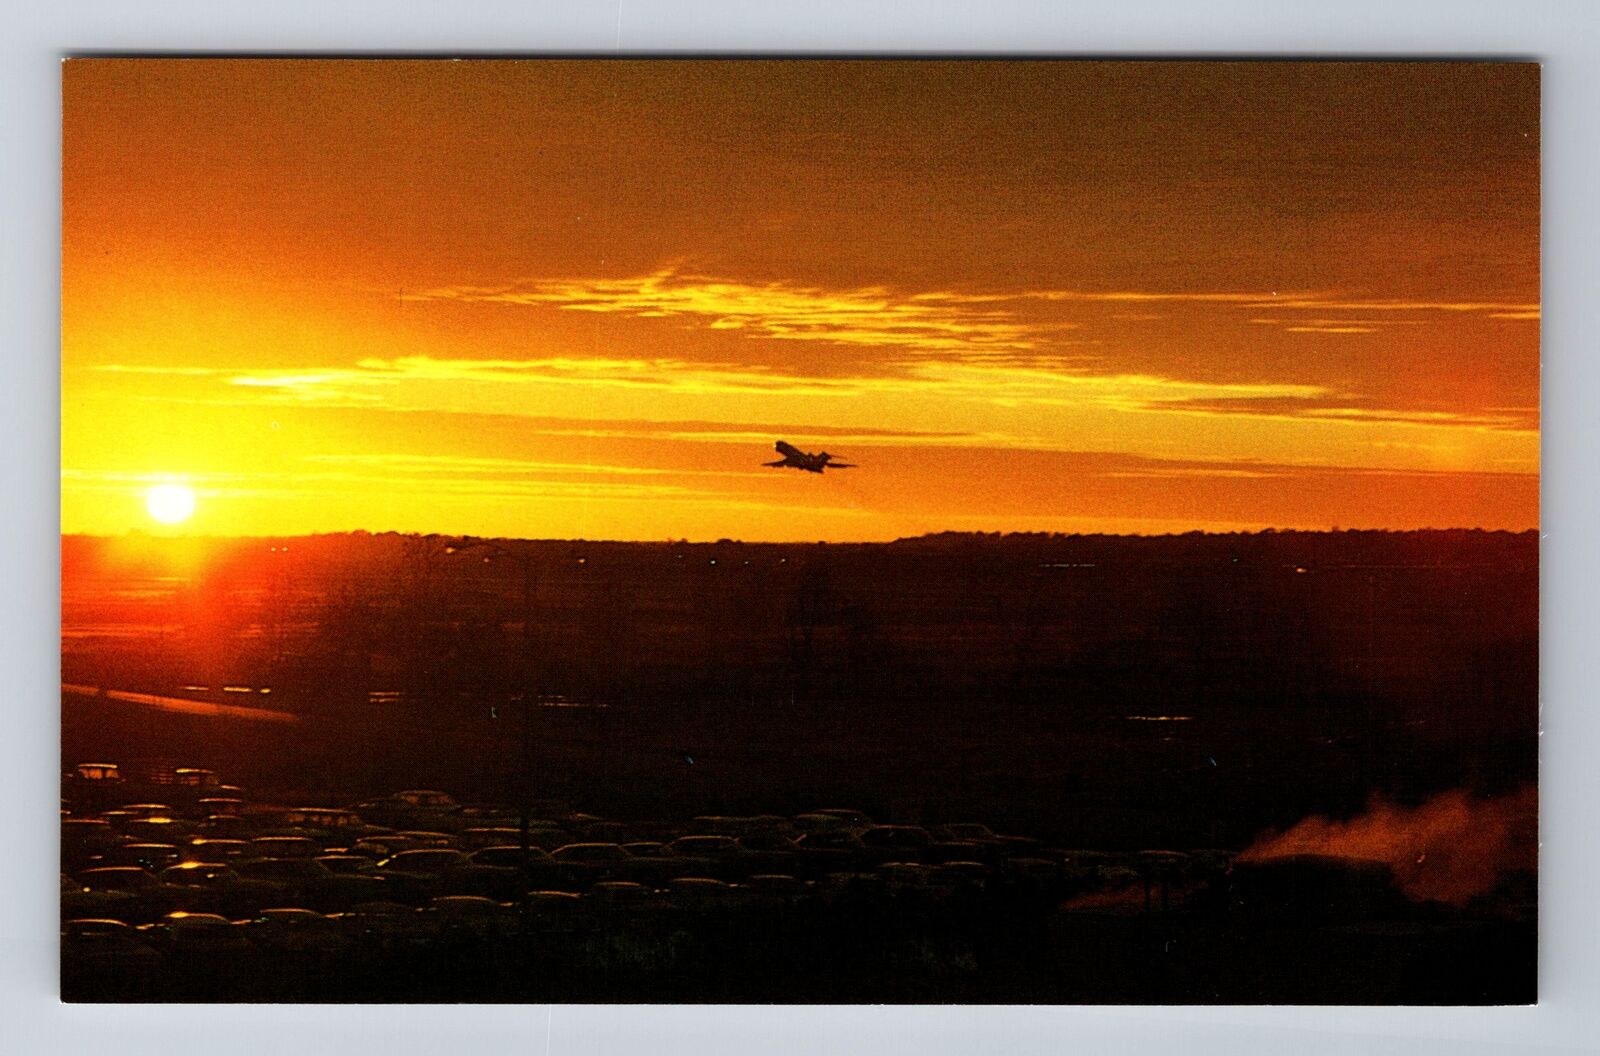 An Evening Take Off, 361st in a Series by Mary Janes RR, Plane, Vintage Postcard